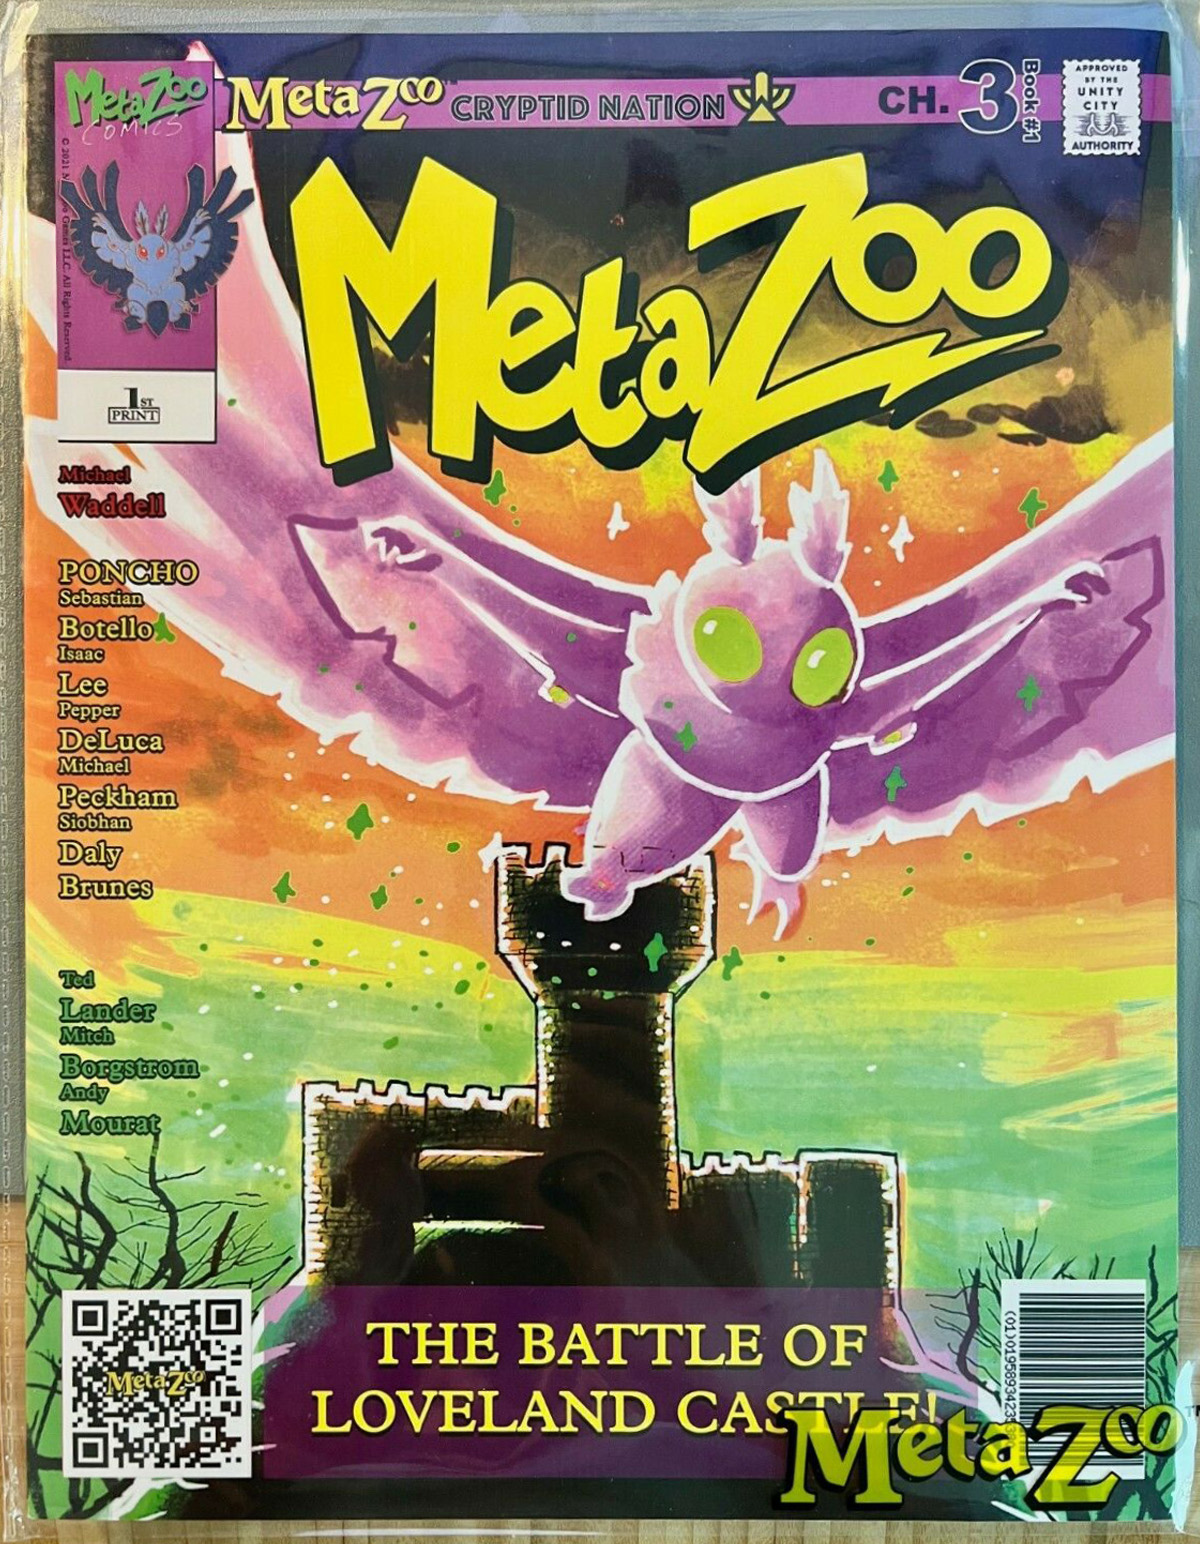 MetaZoo Illustrated Novel - Chapter 3 Print 1 - Front